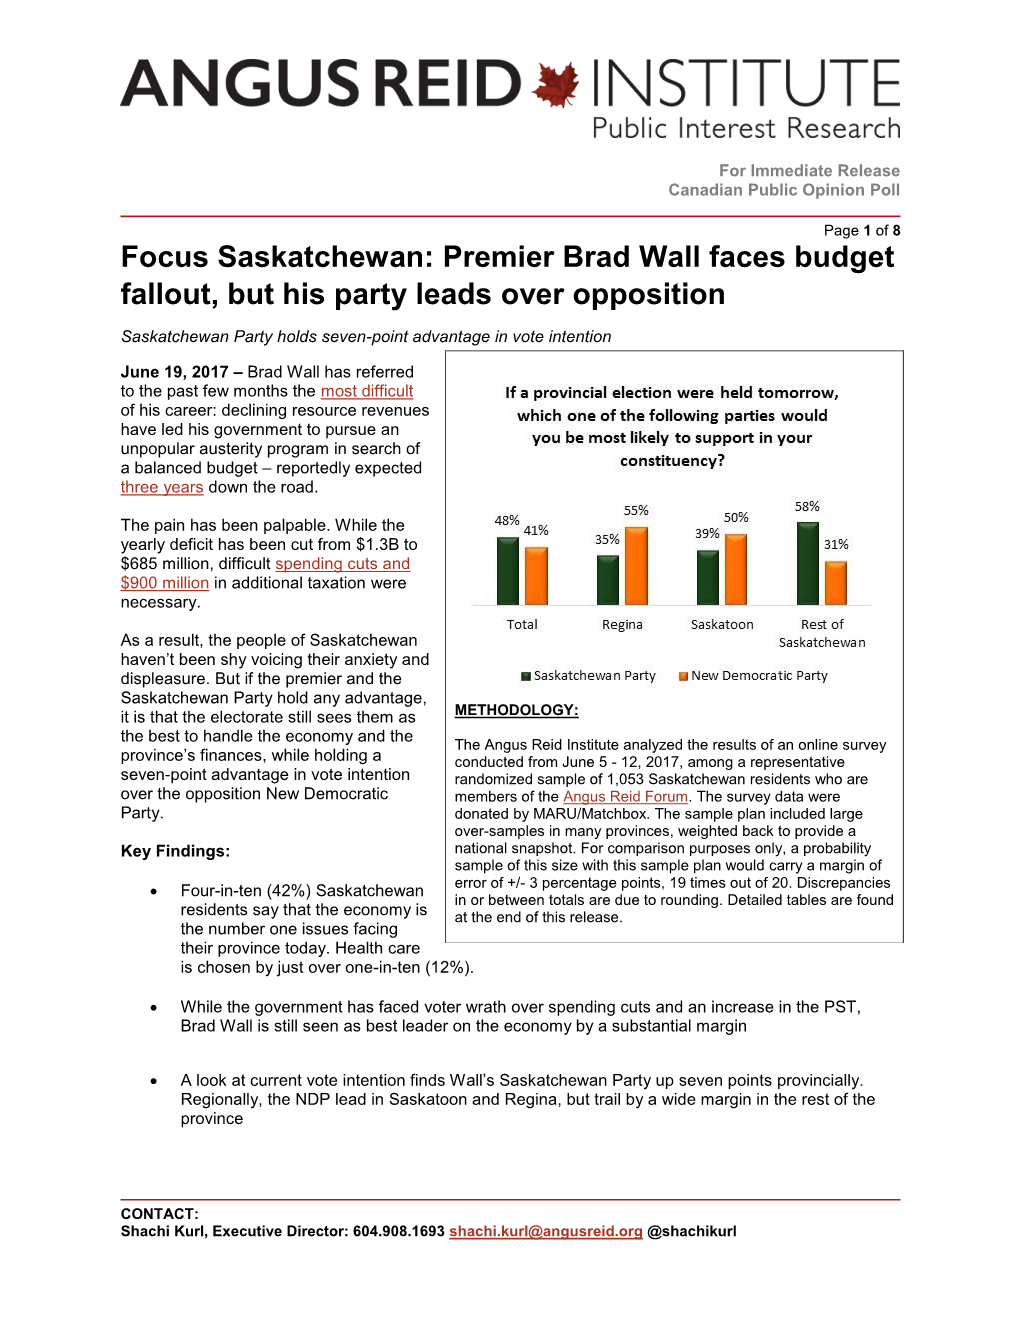 Focus Saskatchewan: Premier Brad Wall Faces Budget Fallout, but His Party Leads Over Opposition